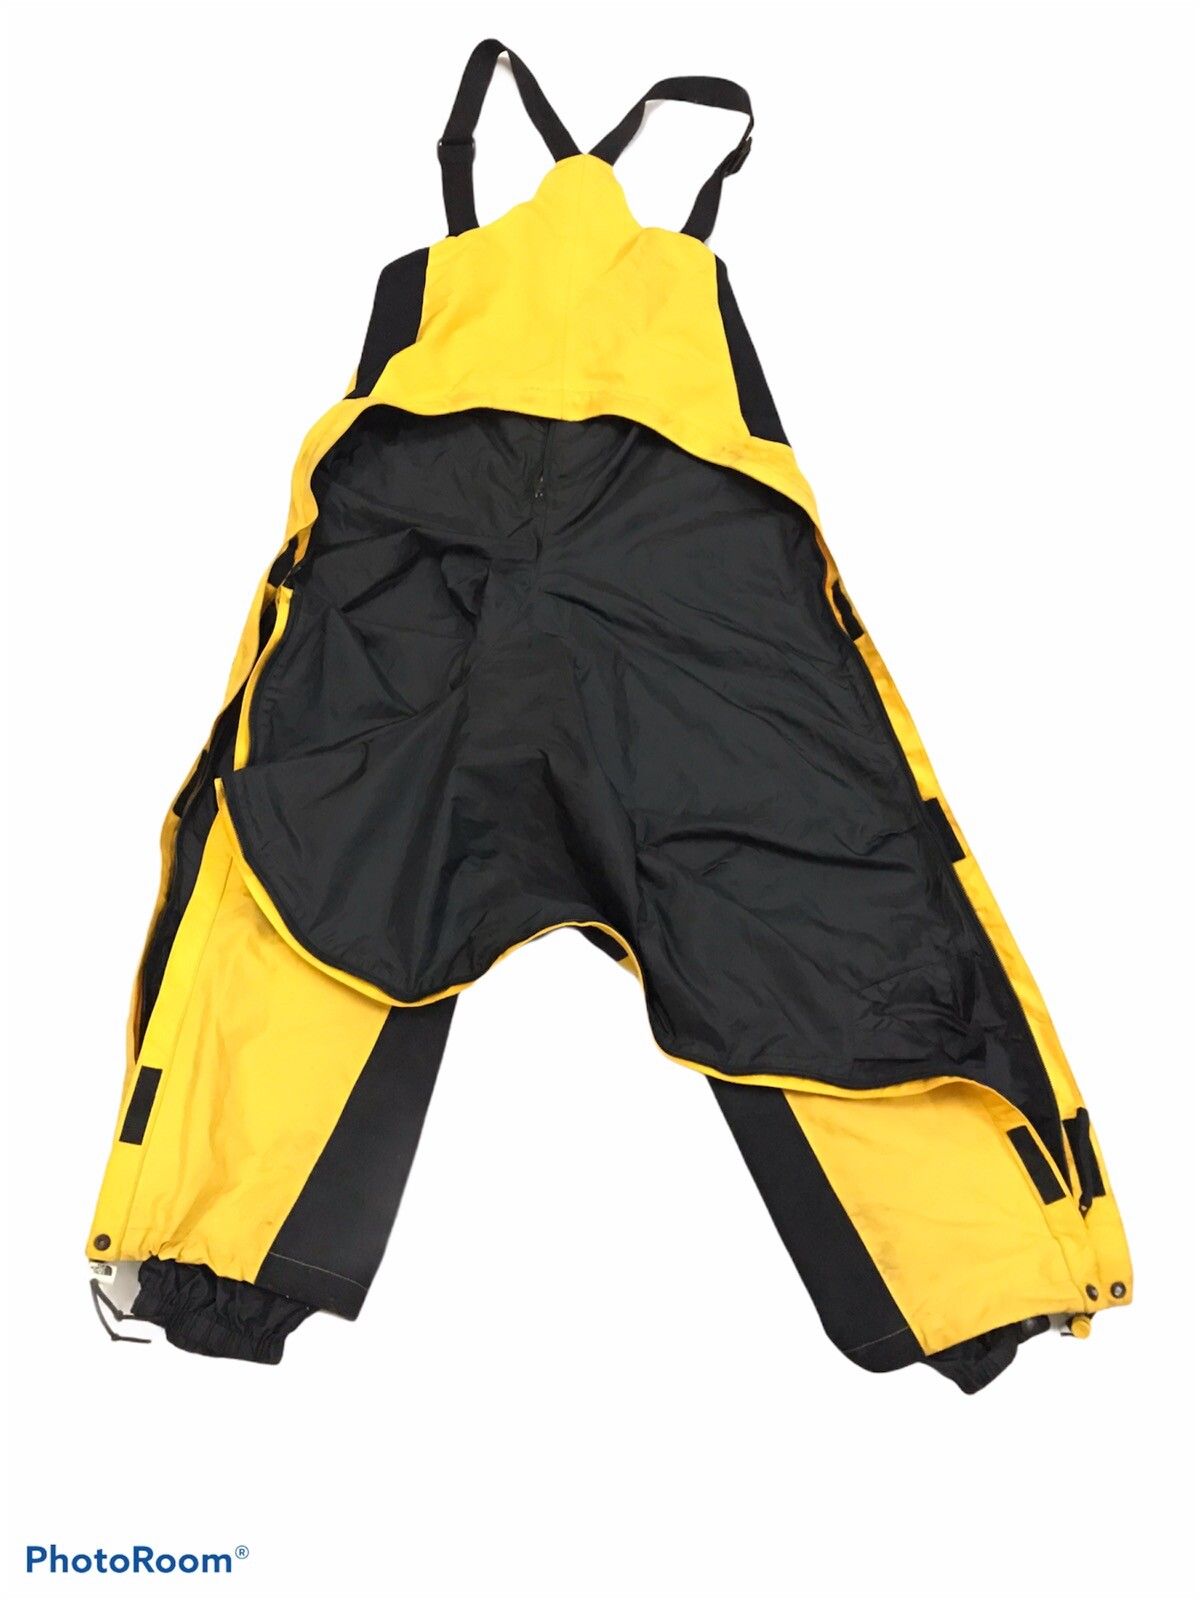 THE NORTH FACE” GORE-TEX SKI PANTS BIBS OVERALLS IN YELLOW - 5